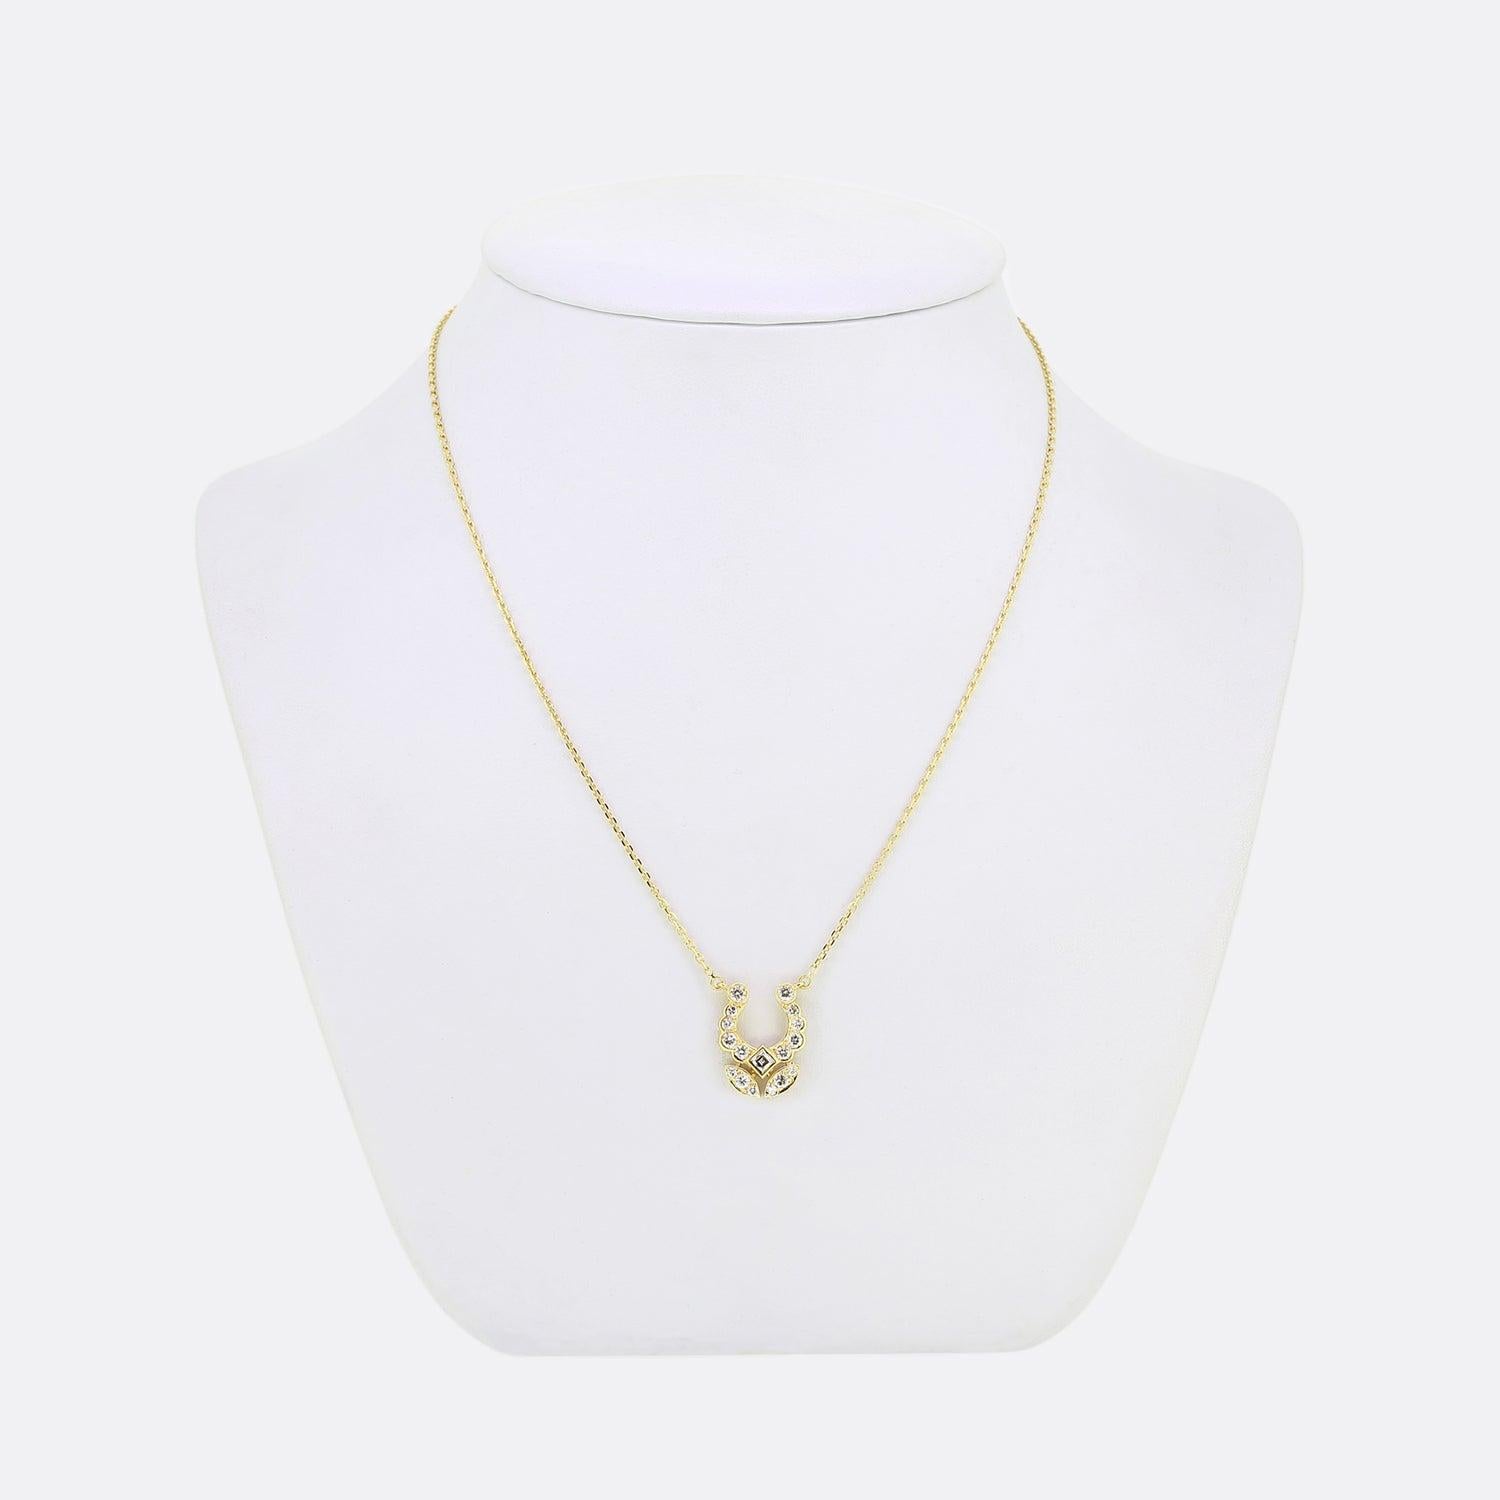 Here we have a stylish diamond necklace from the world renowned jewellery house of Cartier. This vintage piece has been crafted in 18ct yellow gold and features a horseshoe style motif. In the centre of the horse shoe there is a a lovely bright